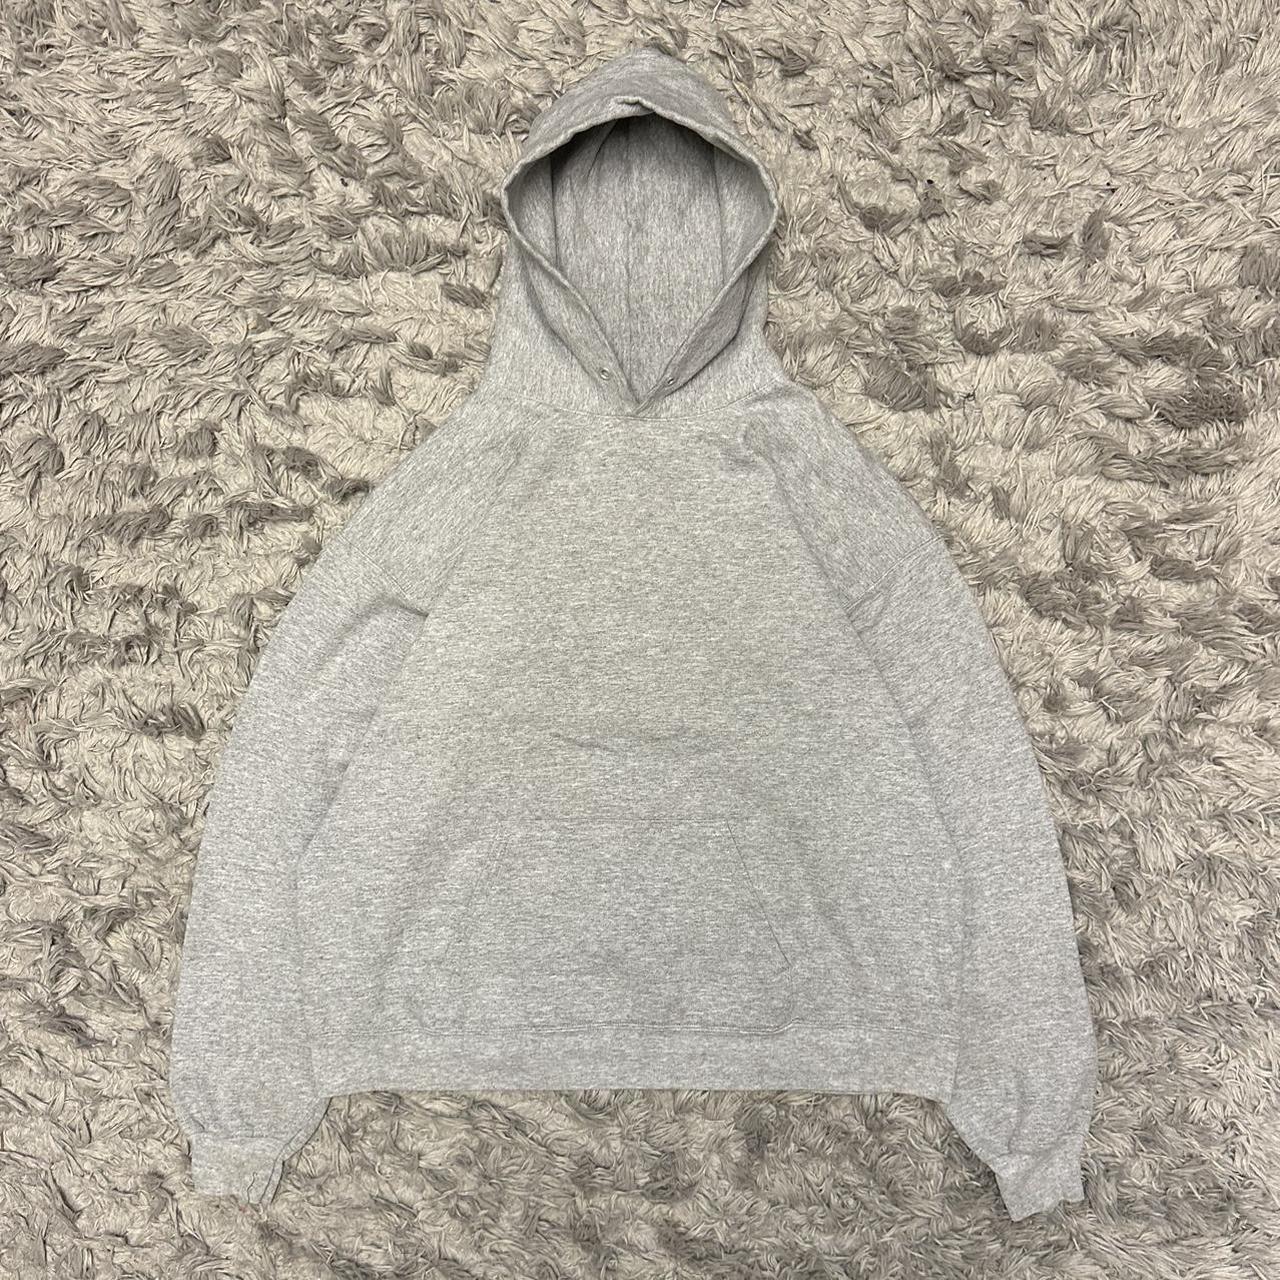 Super soft SC&CO size XL grey hoody with strings. - Depop